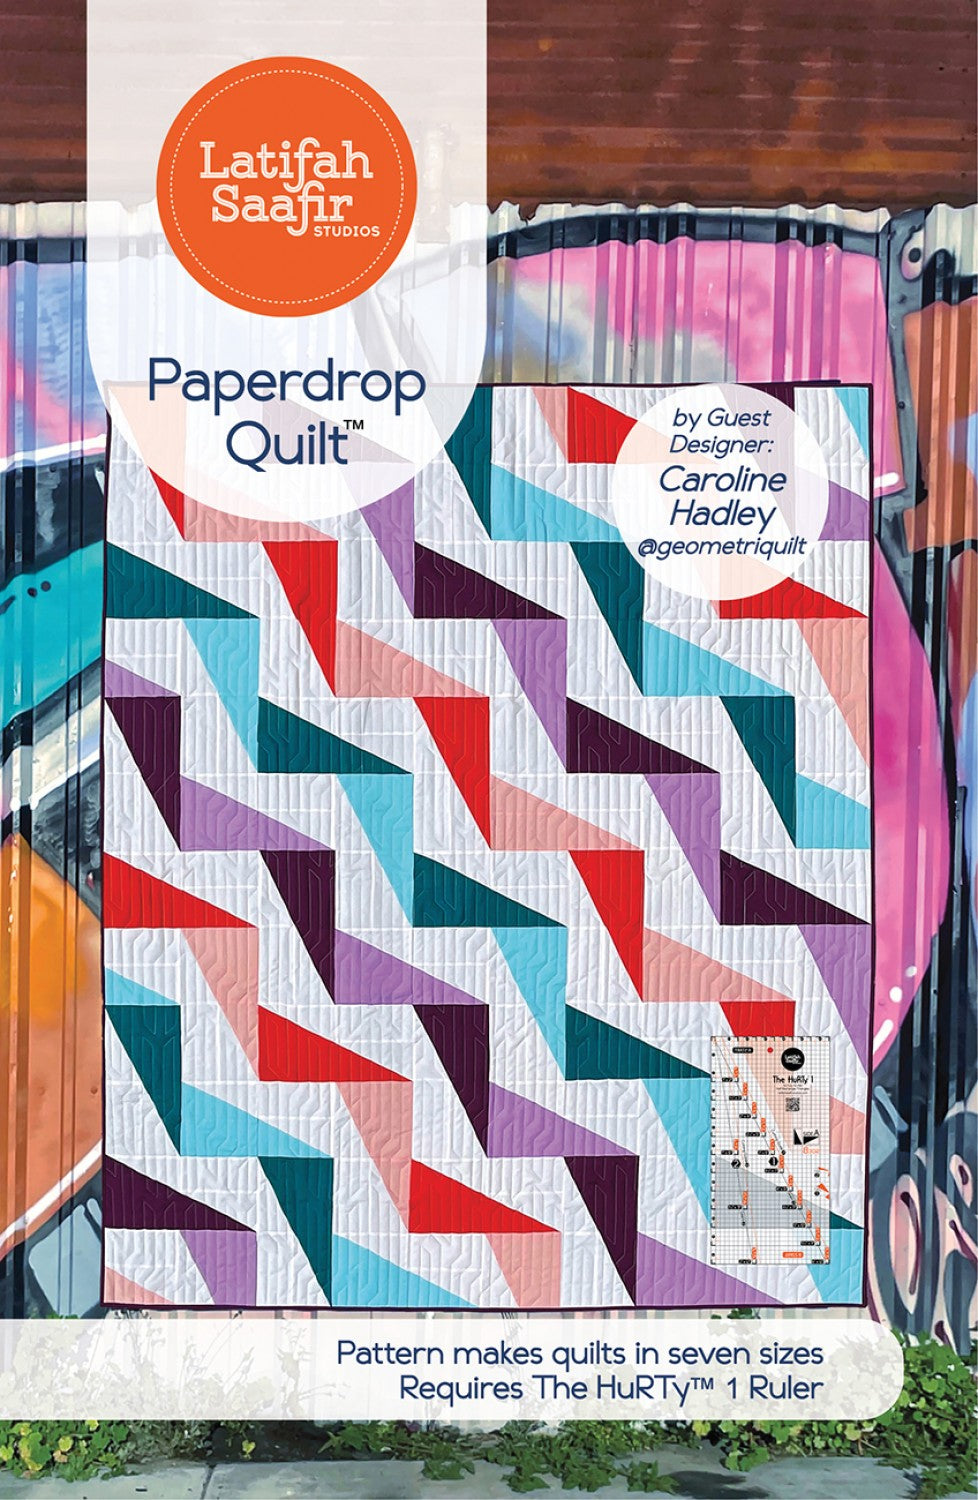 Paperdrop Quilt Pattern for Baby to King Size Quilts by Caroline Hadley for Latifah Saafir